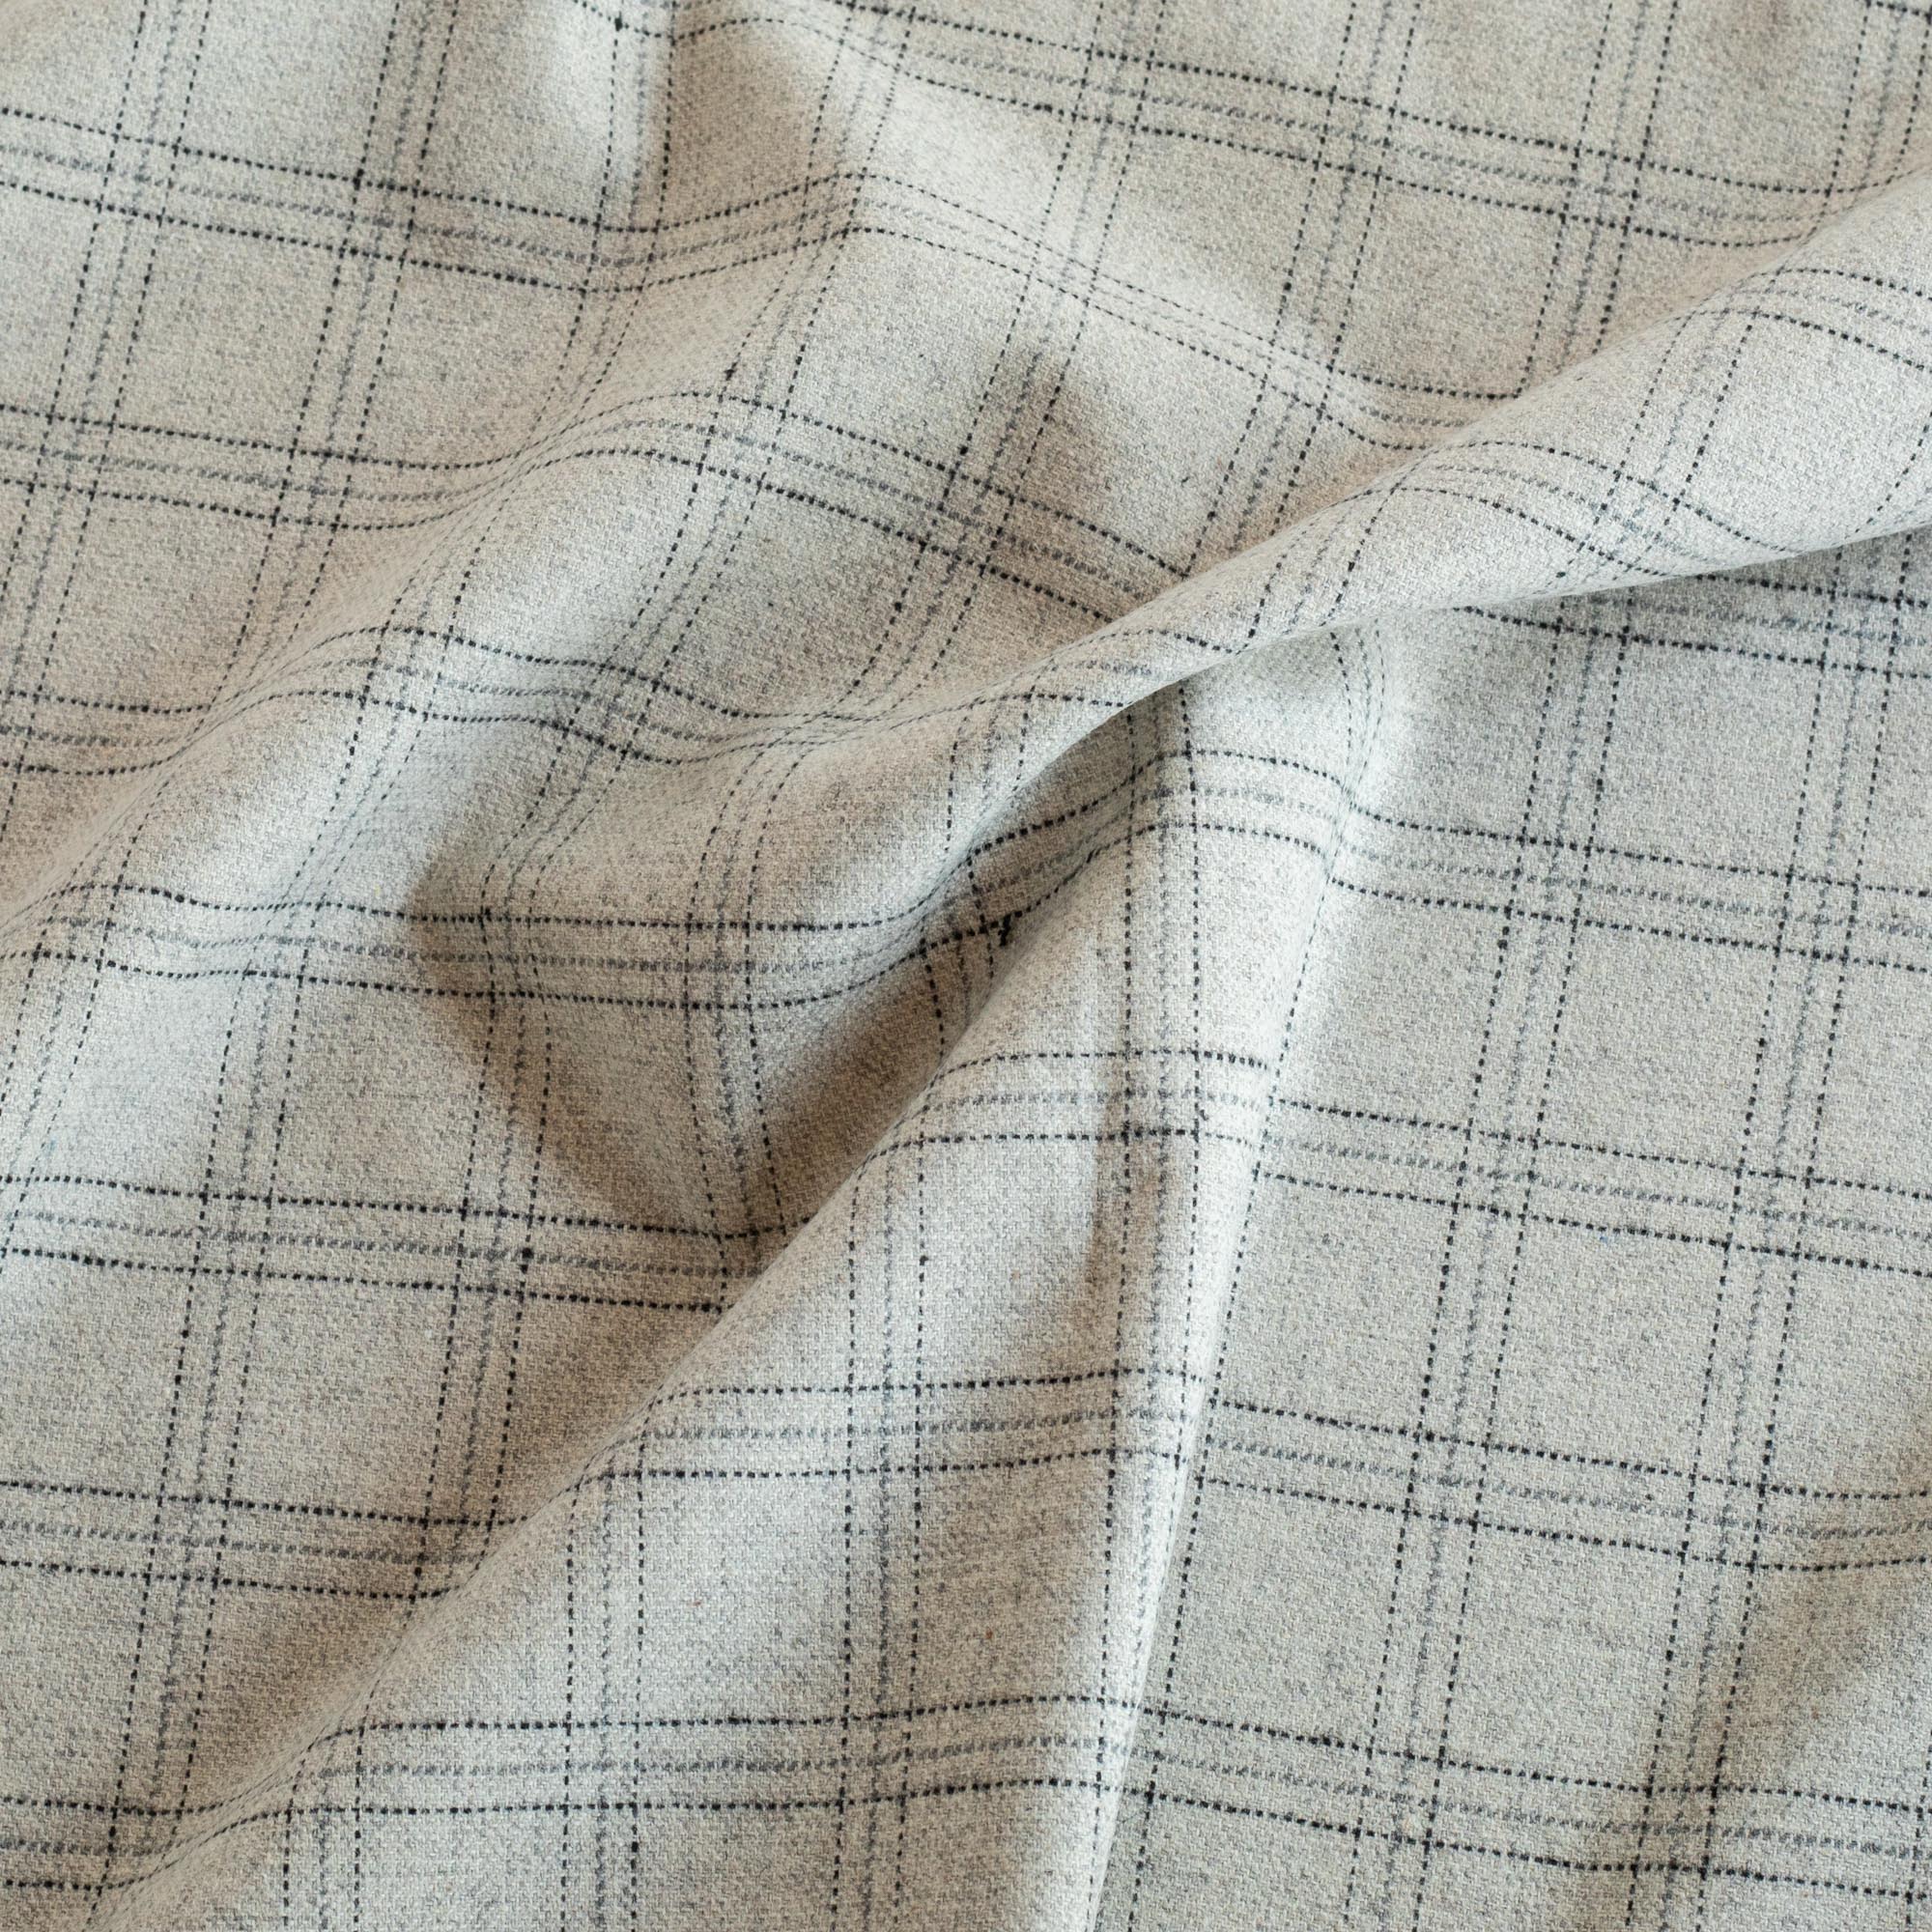 Dorset Plaid: a fog gray with fine blue and charcoal lines fabric